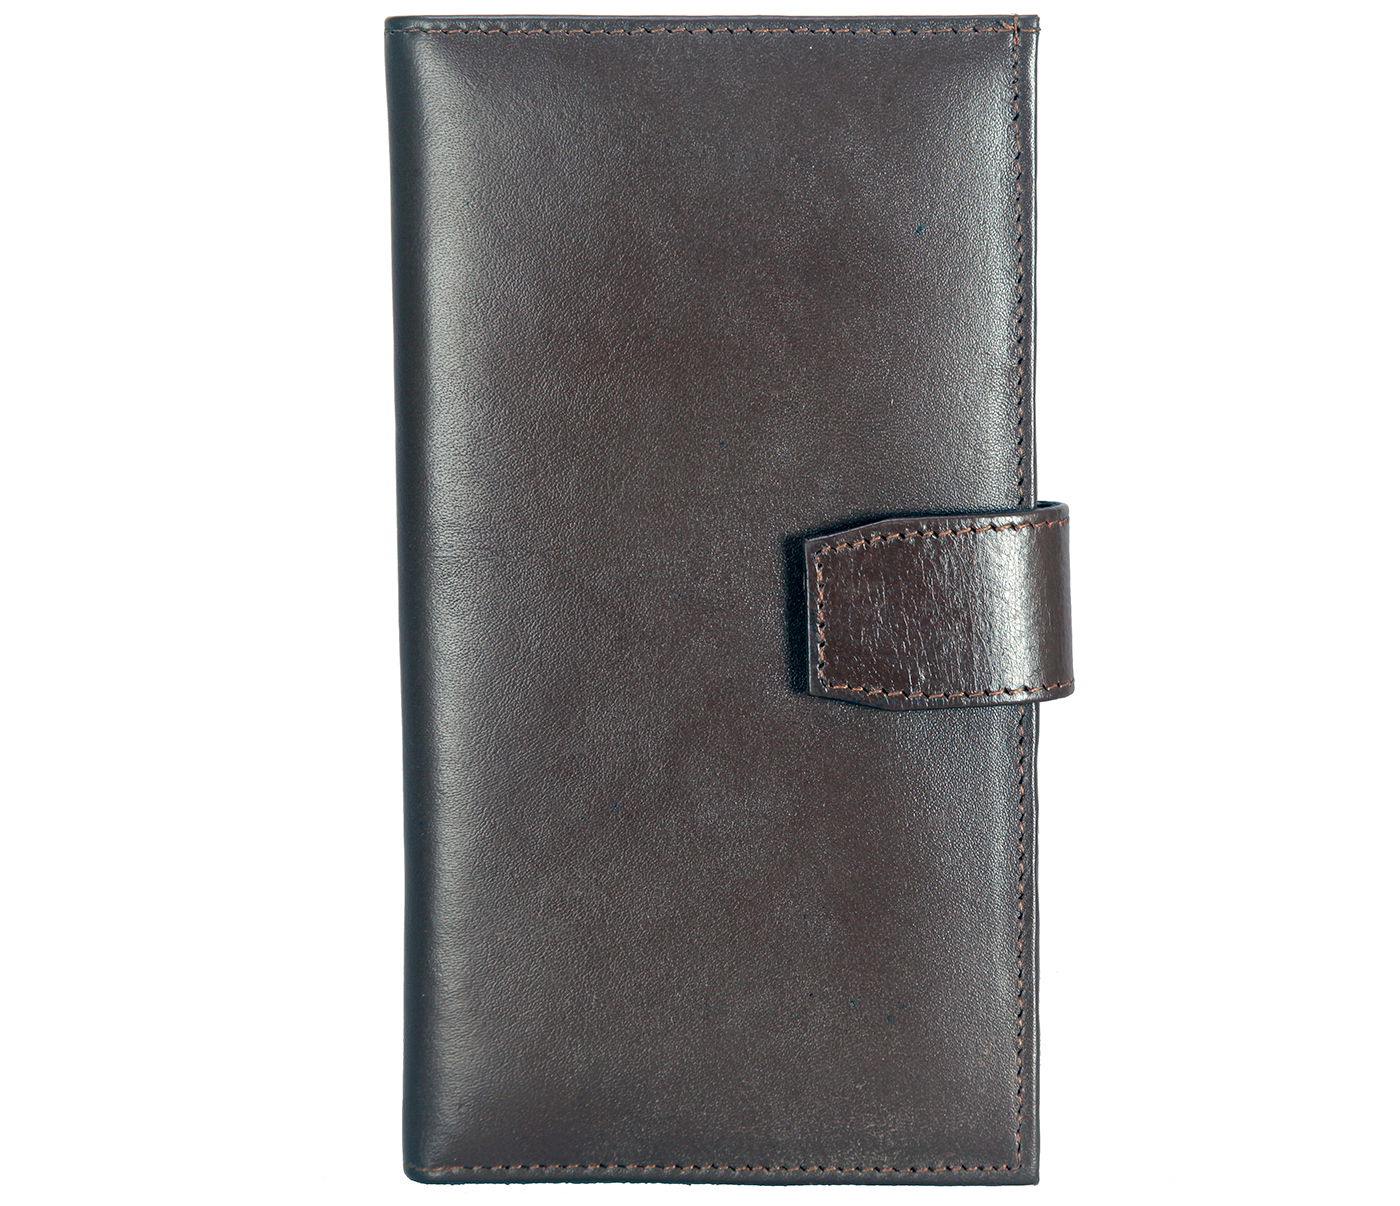 Wallet-Cameron-Women's wallet with mobile holder in Genuine Leather - Brown